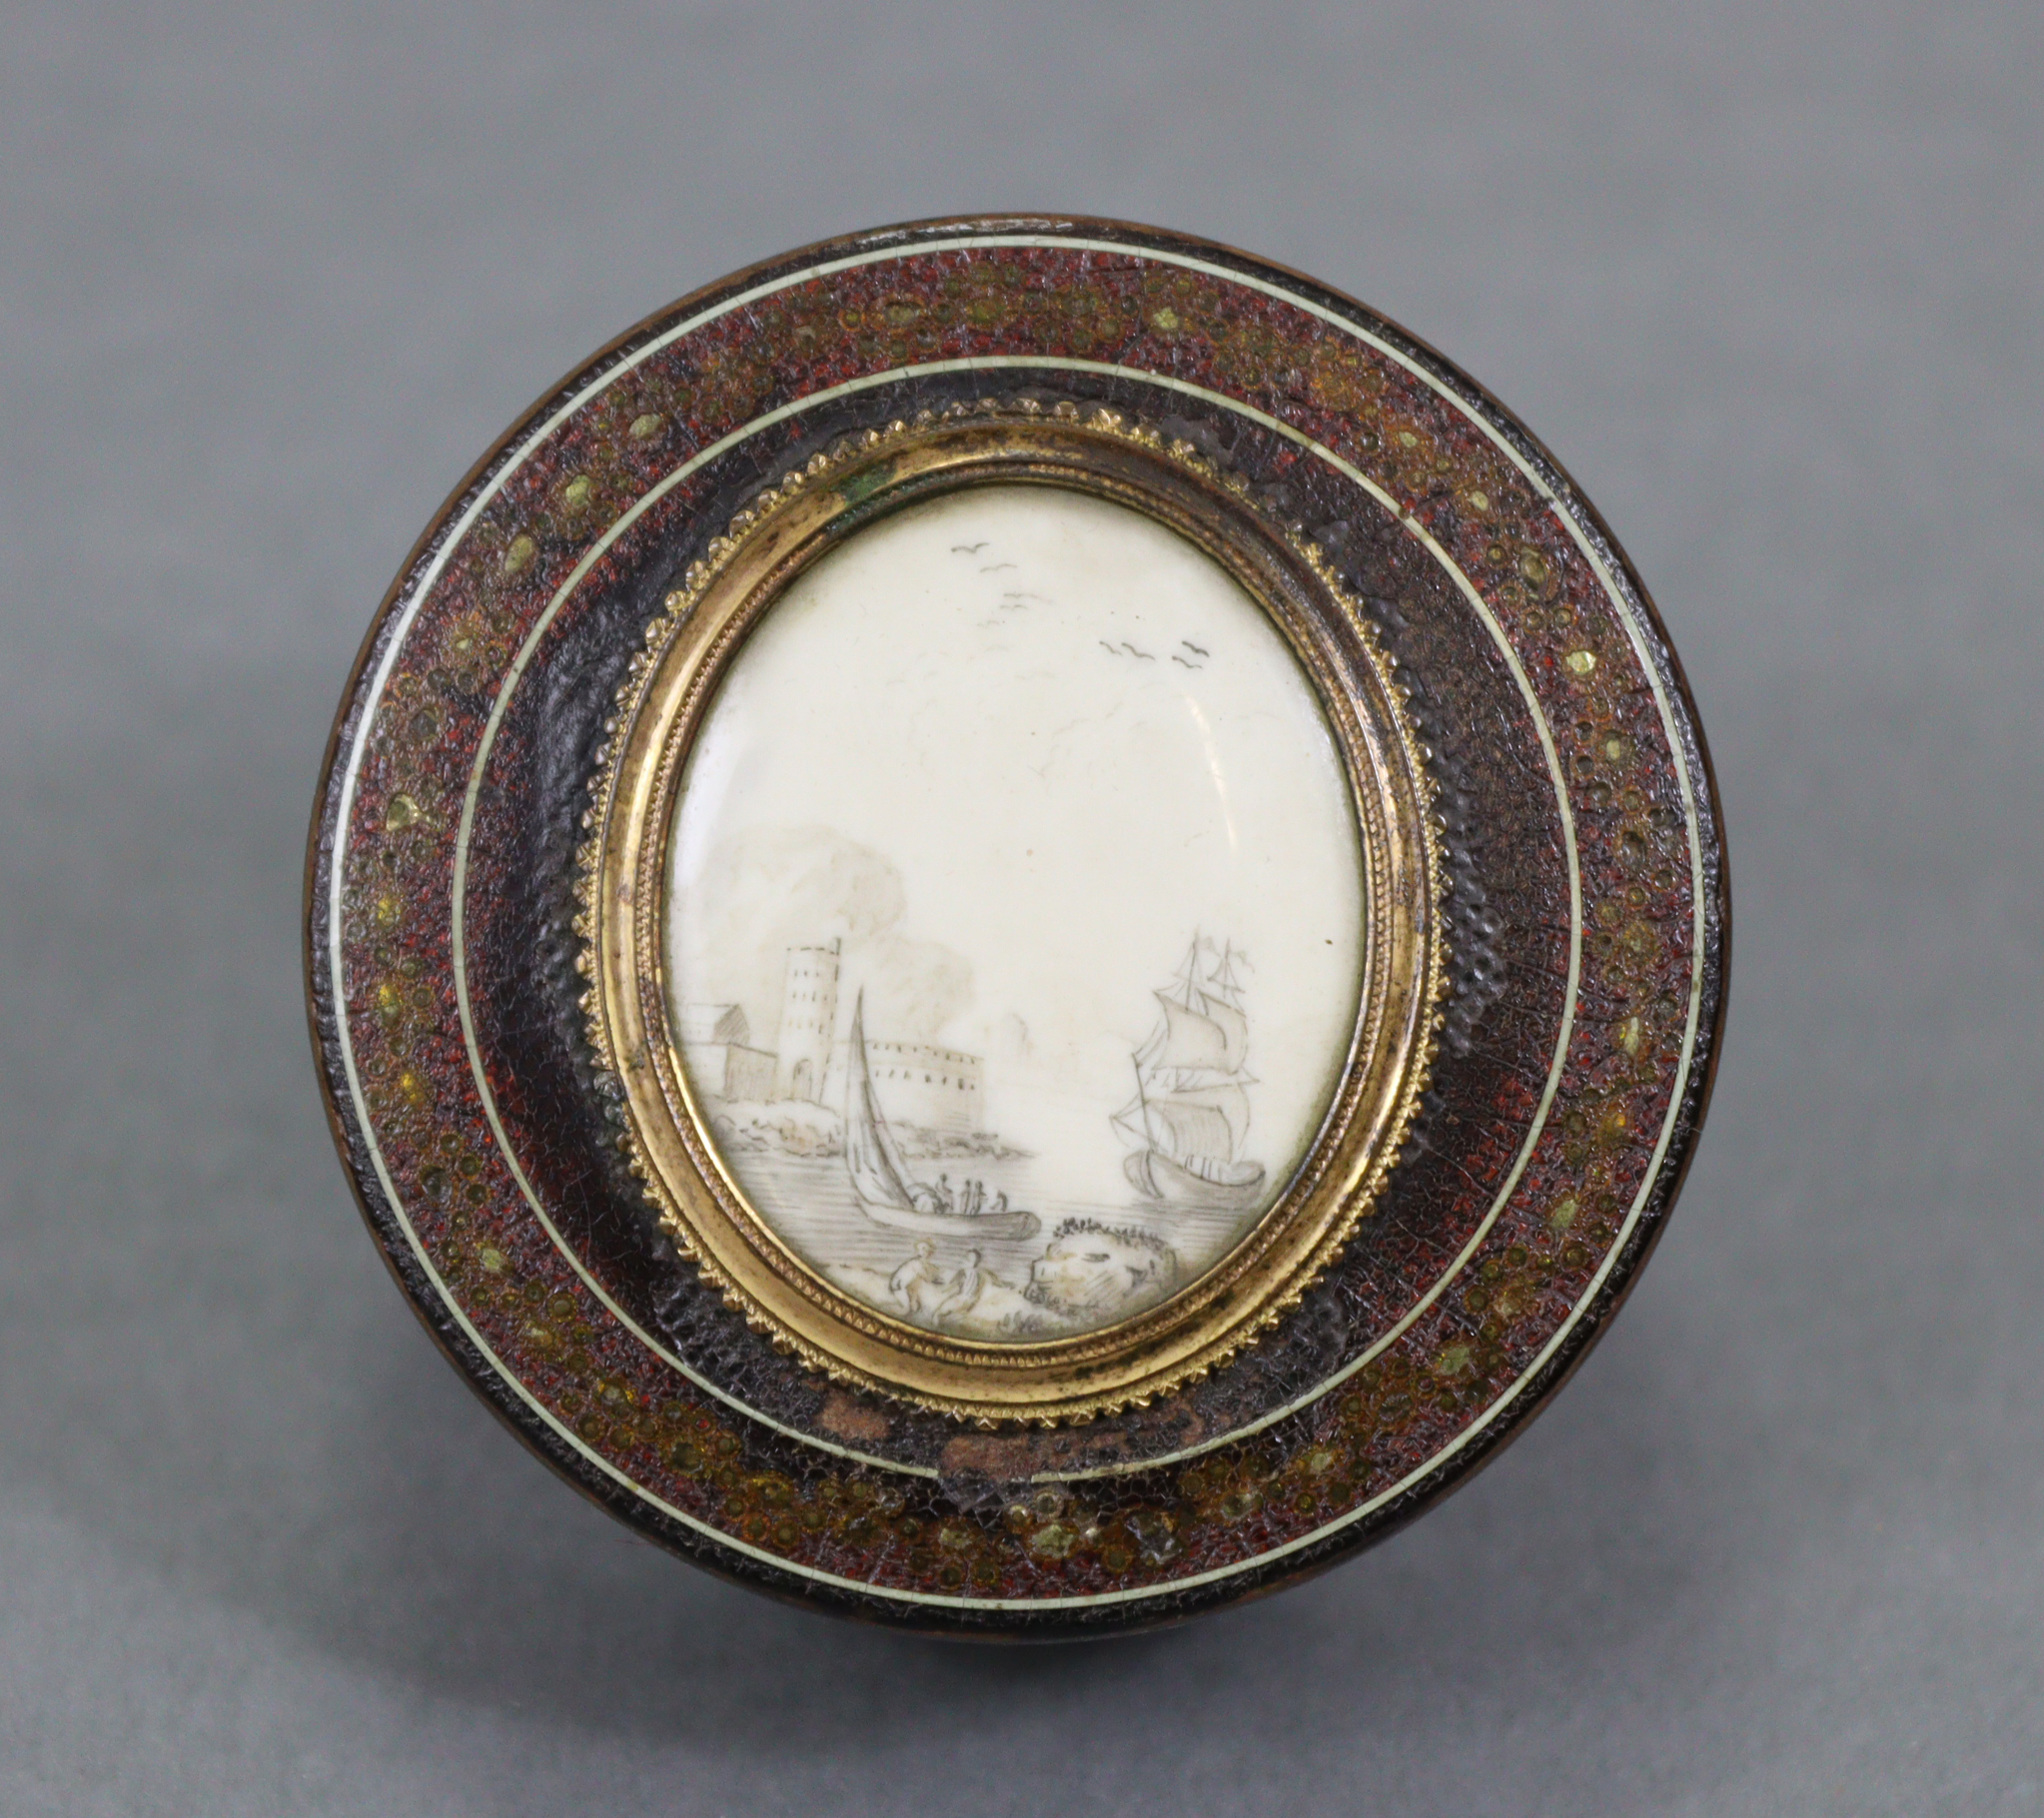 A late 18th century tortoiseshell-lined drum-shaped snuff box with lacquered exterior, the lid inset